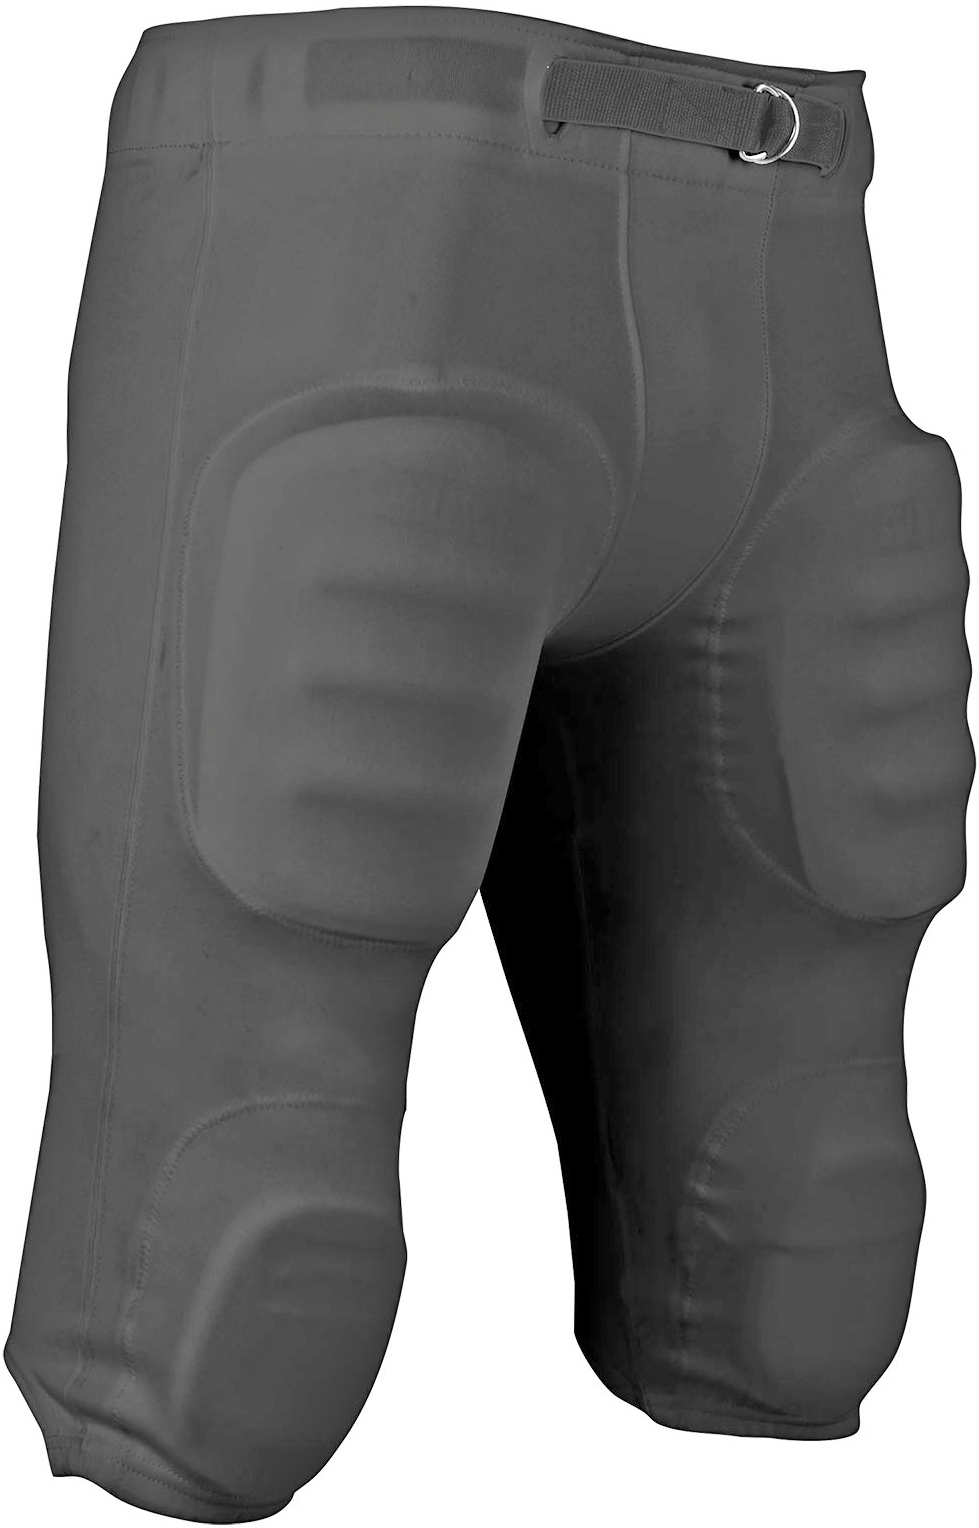 E128975 Champro Touchback Practice Football Pants (Pads Not Included)